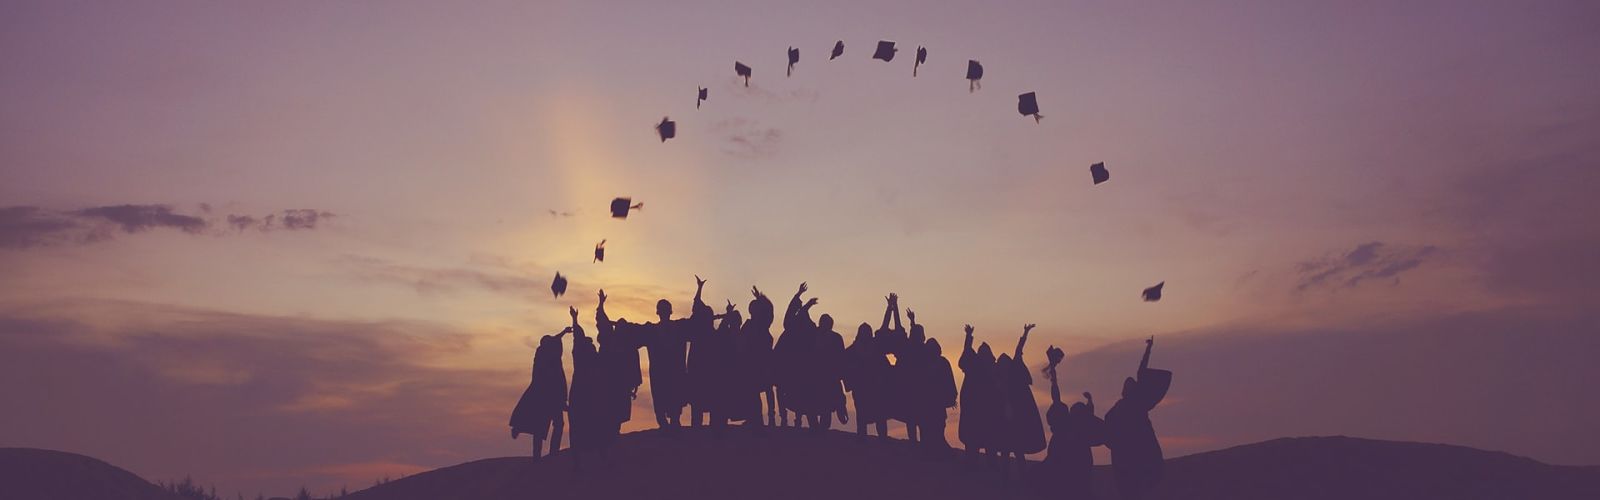 graduates standing on a hill tossing their caps in the air